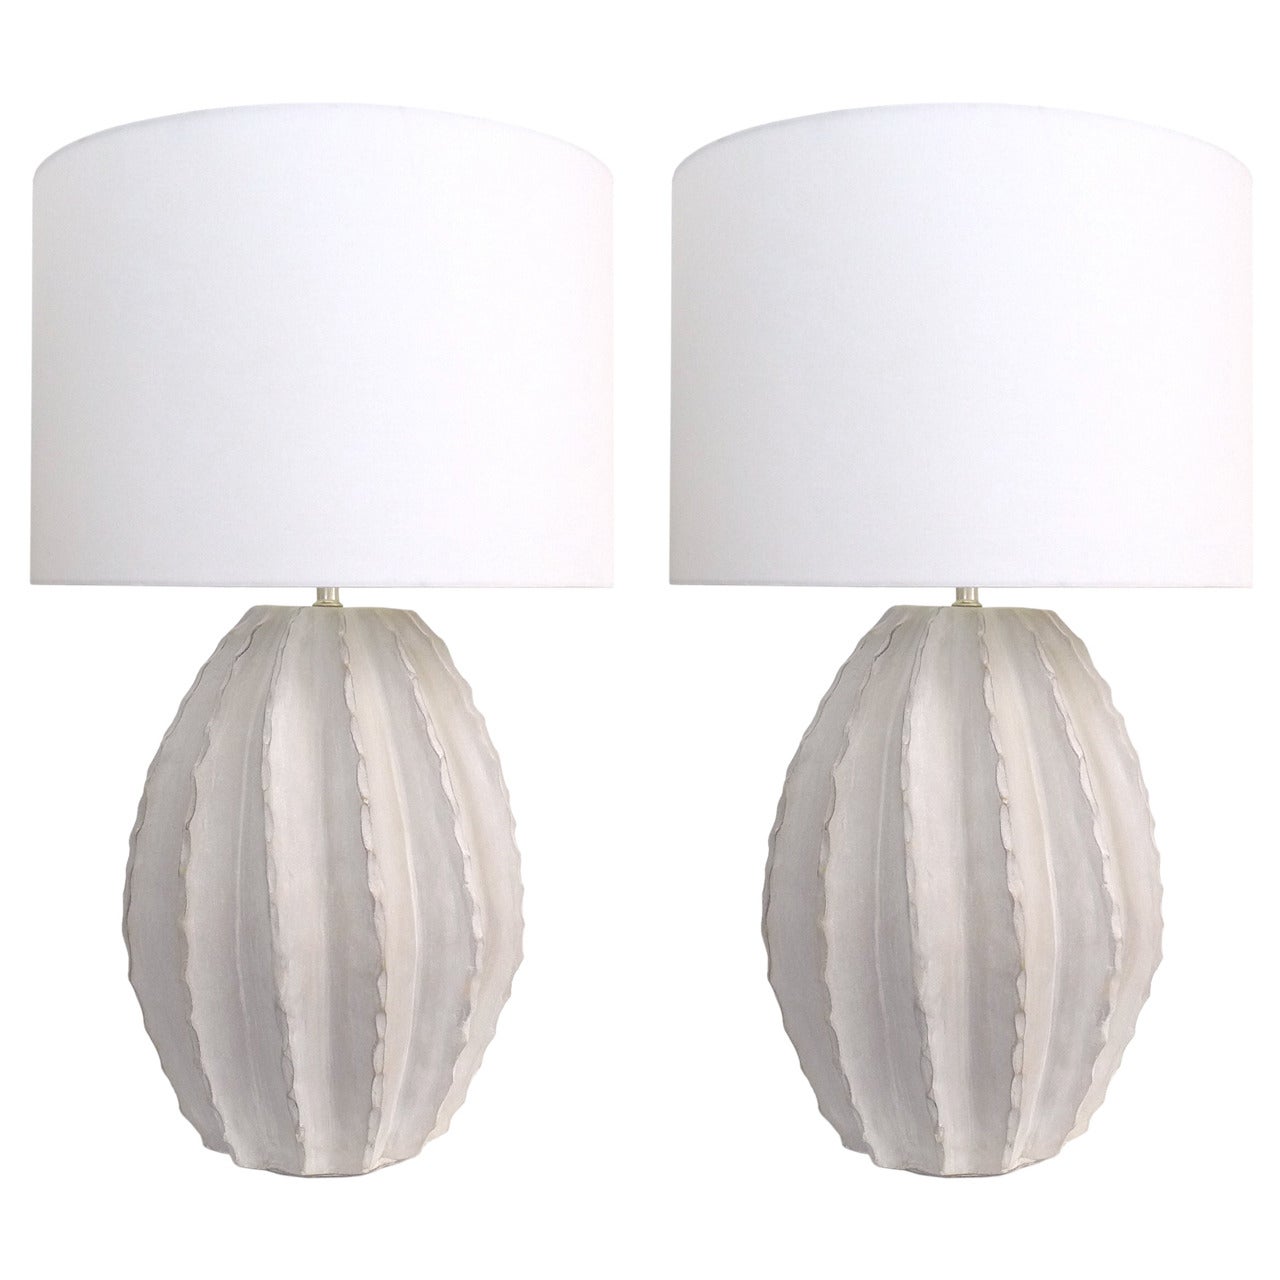 Pair of Fluted Plaster Table Lamps